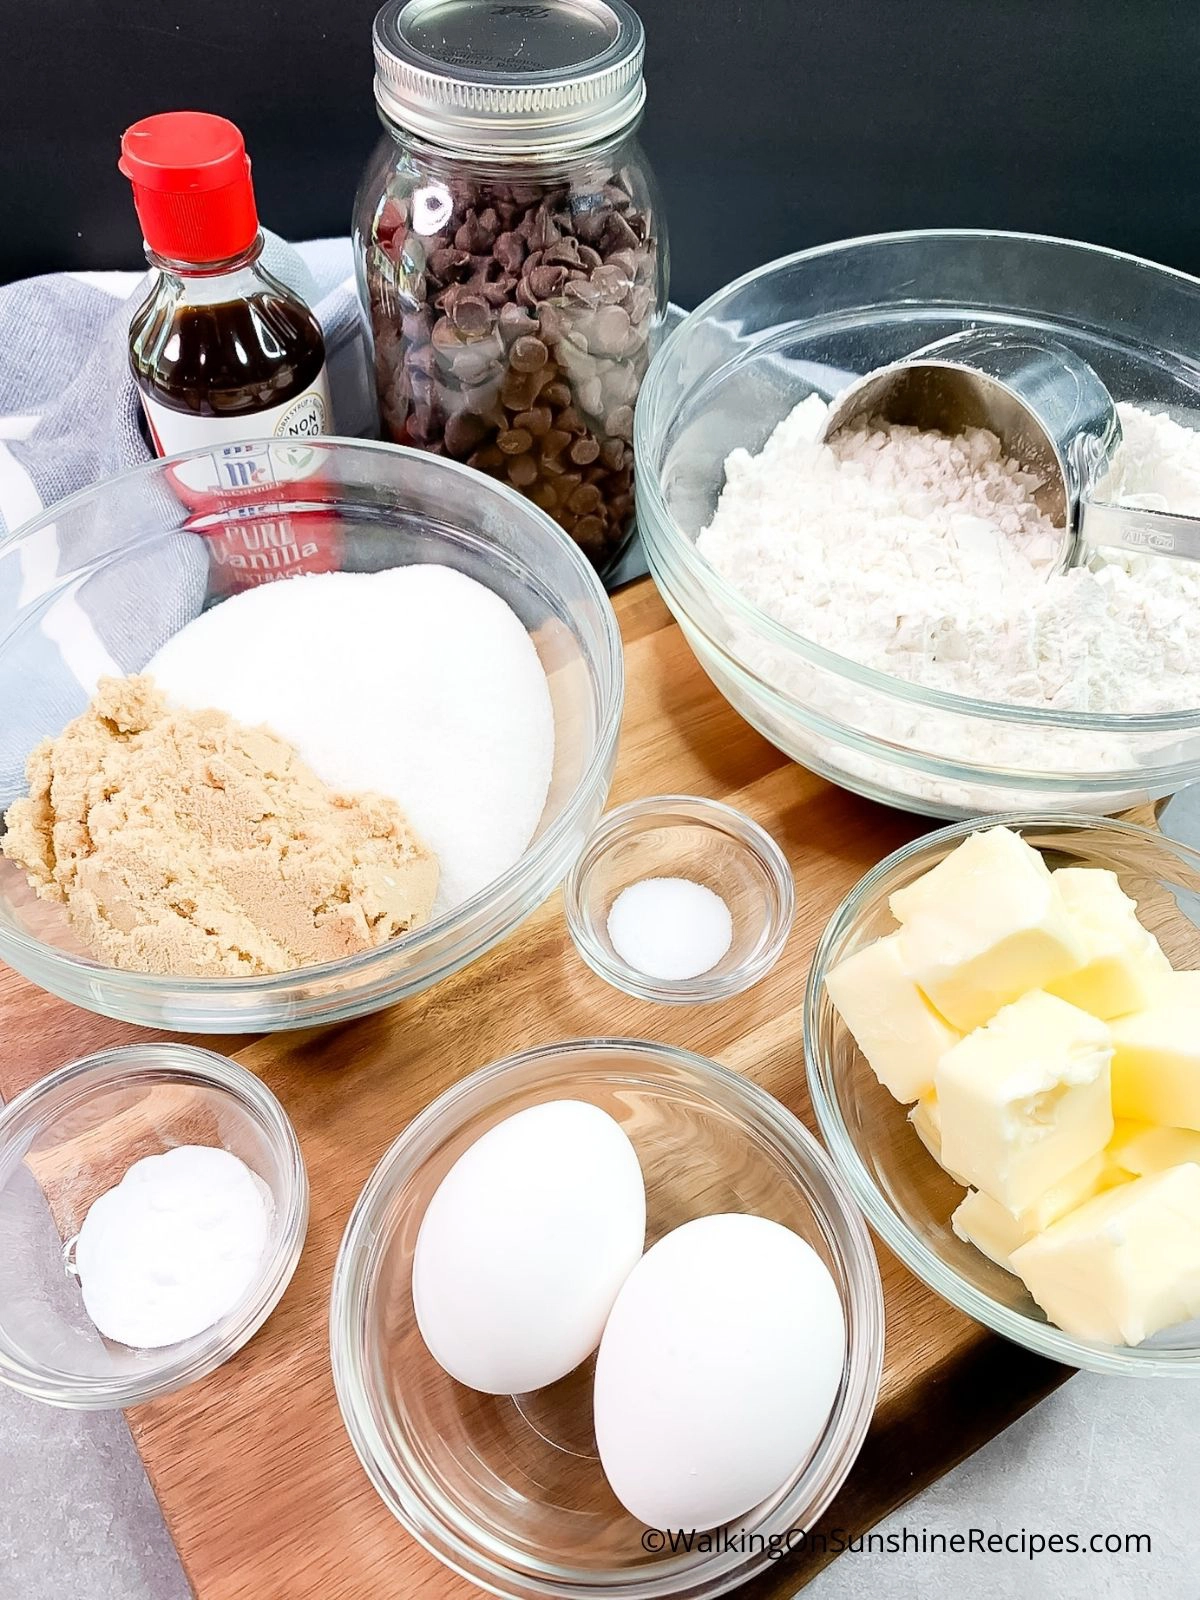 Ingredients for Giant Chocolate Chip Cookie.